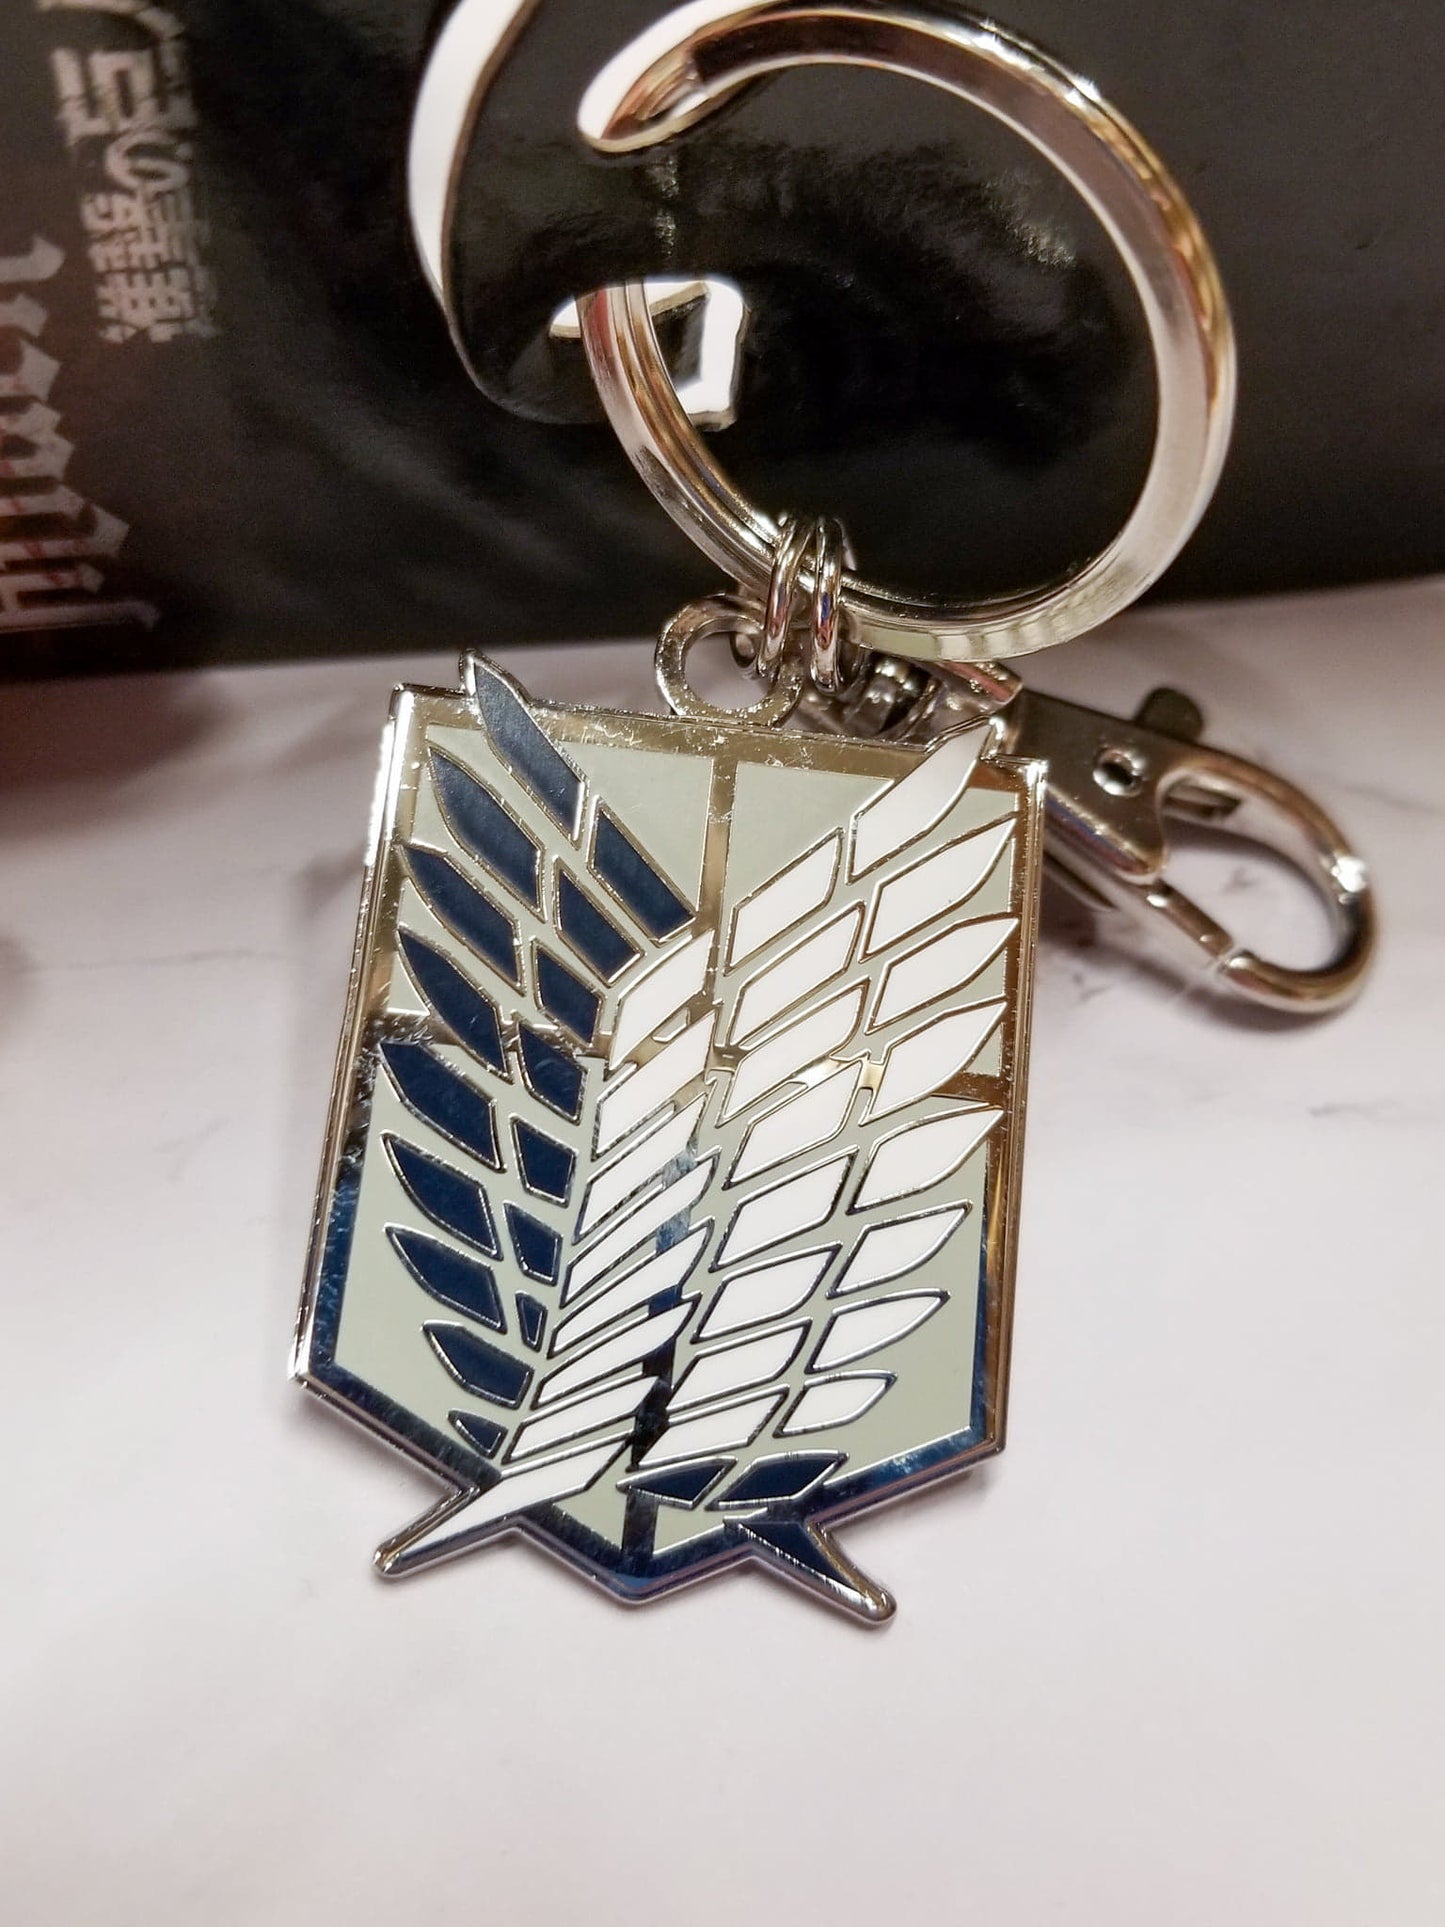 An enameled metal keychain with clip and ring, depicting the Scout Regiment (Scout Legion) emblem from Attack on Titan.  The metal emblem is approximately 1 inch wide by 1.5 inches tall.